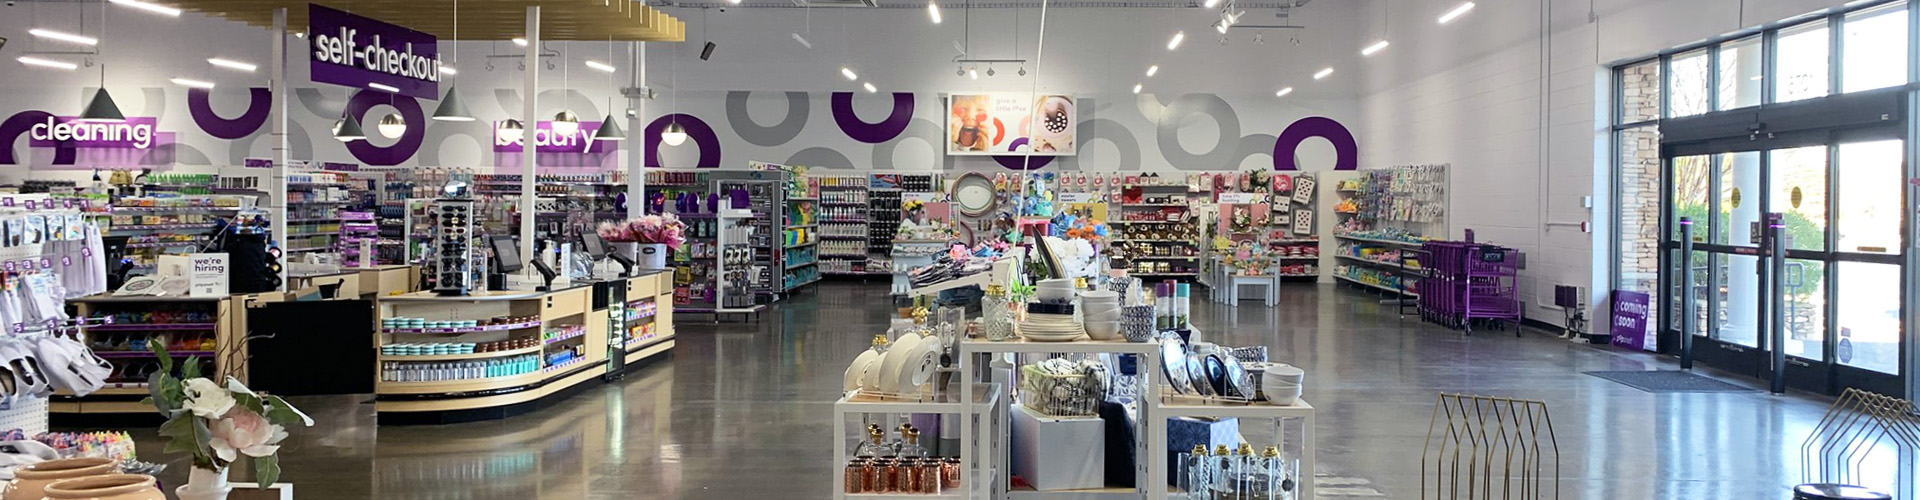 The New Age of Dollar Channel Retail Report Banner featuring lobby of open format pOpshelf store and self checkout